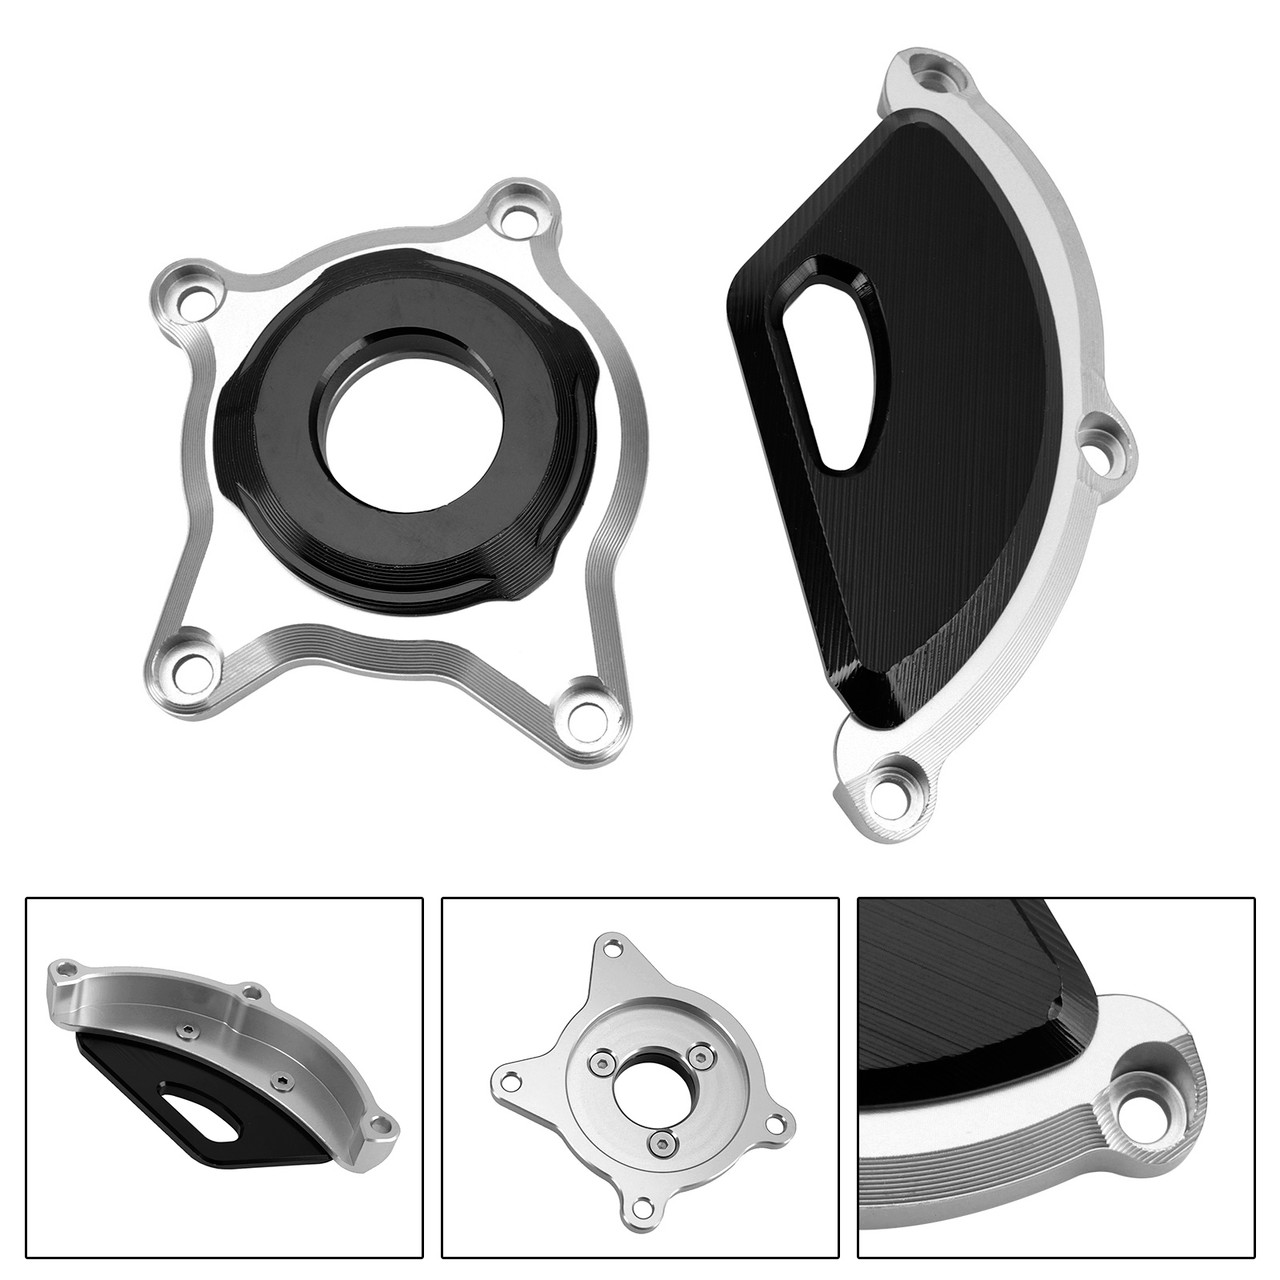 Plastic Engine Protector Covers Slider Titanium For Kawasaki Z900 Rs Cafe 17-23